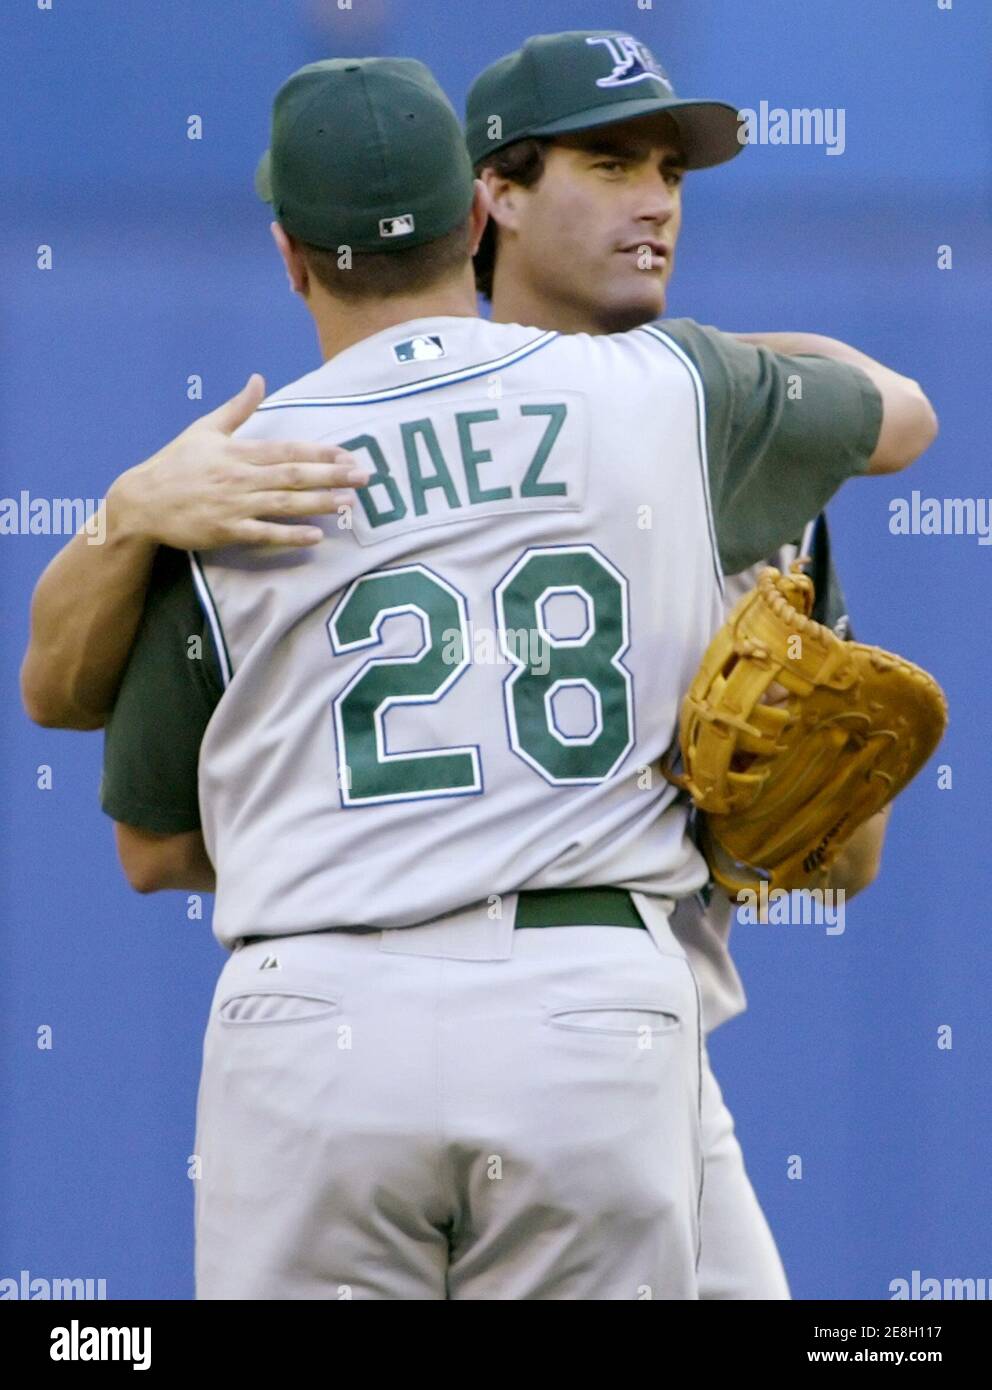 Tampa Bay Devil Rays' Travis Lee is congratulated by teammate Danys Baez  (28) at the end of American League play in Toronto, September 3, 2005. Lee  hit a game winning two run